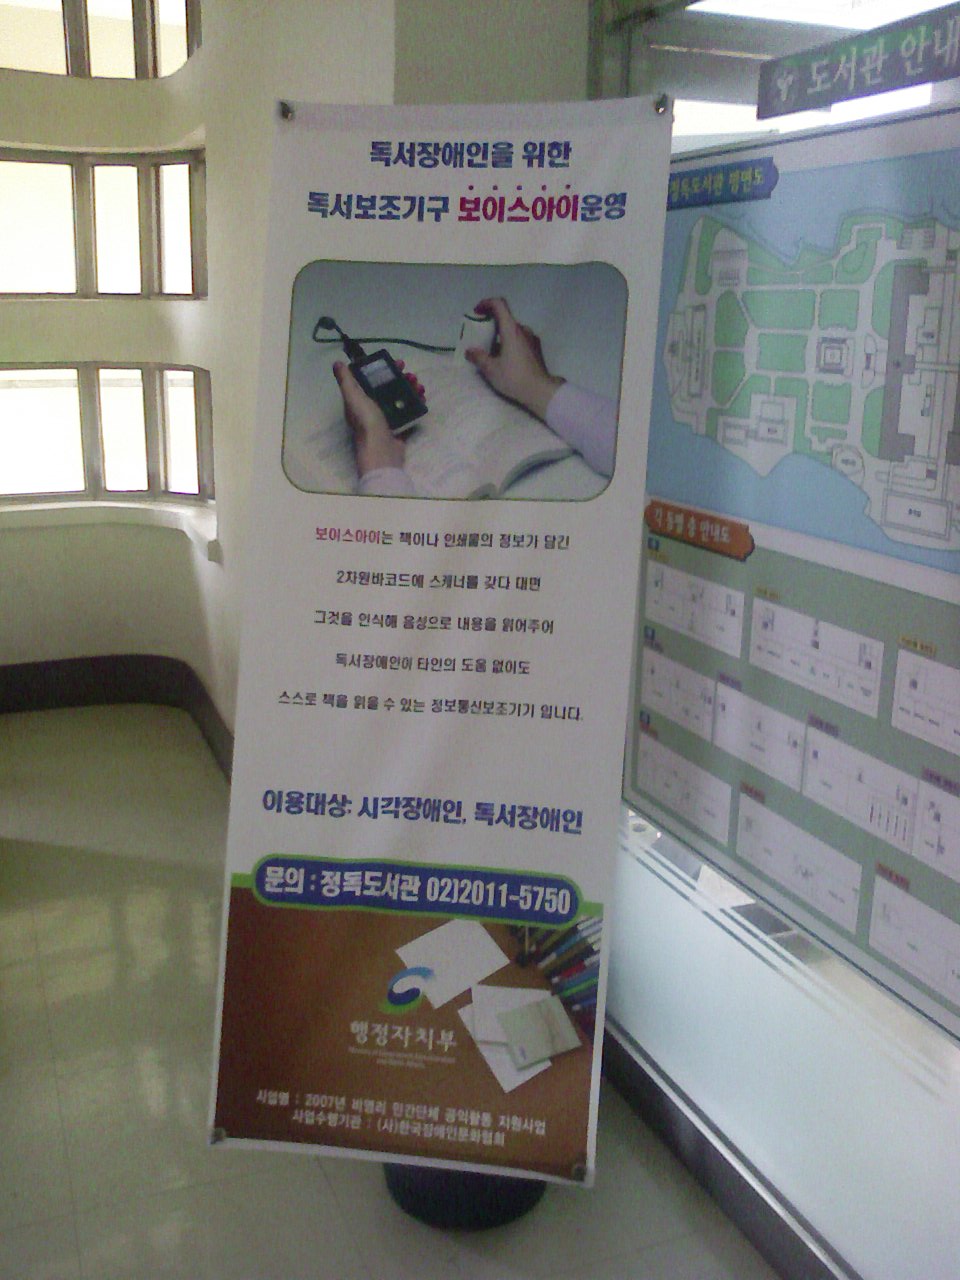 VoiceEye (OCR reader for the blind) available in Korean library